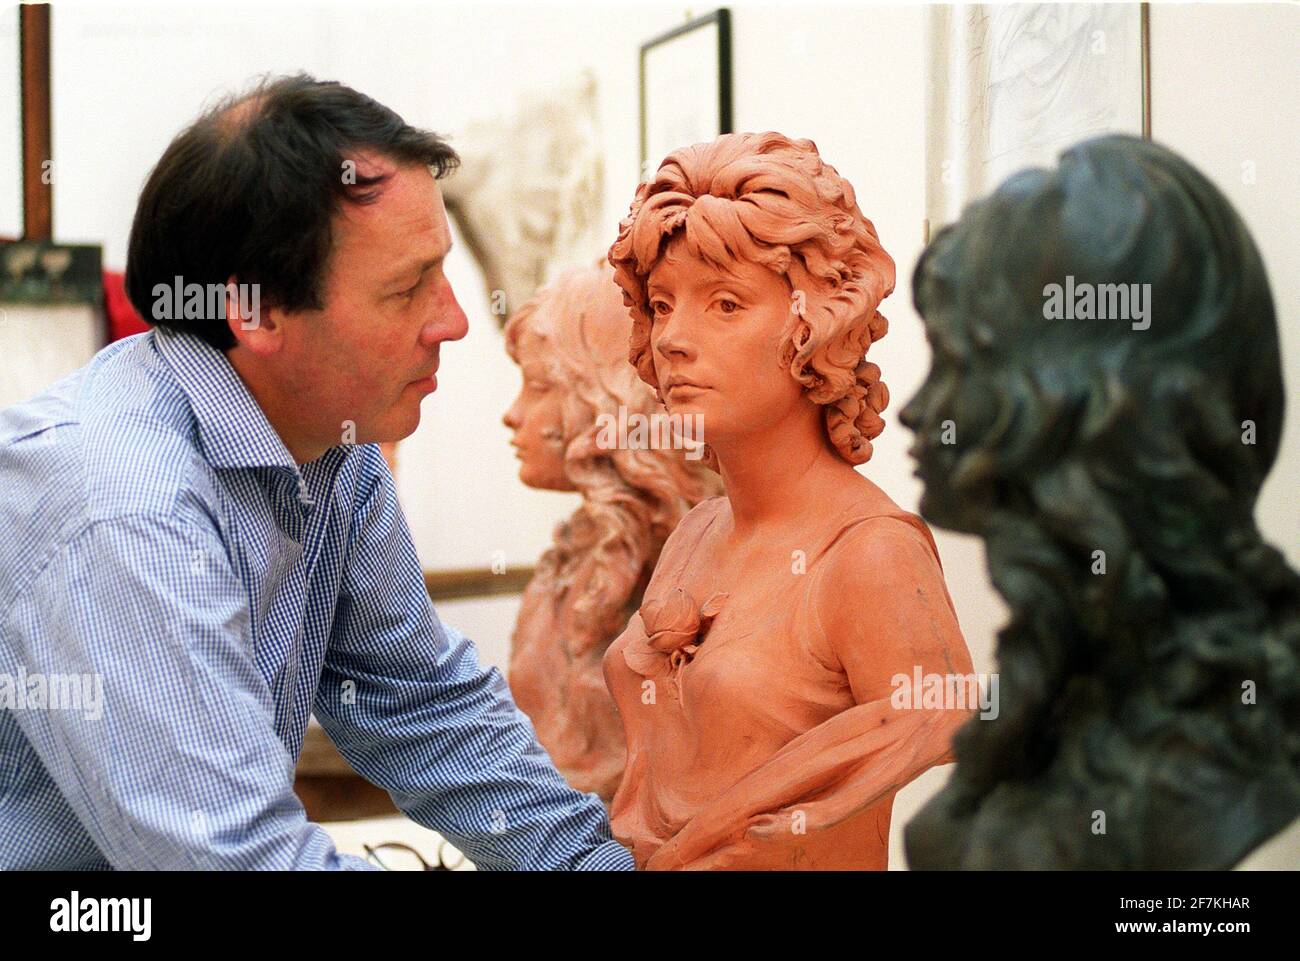 Francis Machin admires sculptures  of his father Arnold - creator of the  Queen's postage stamp image - which form part of an exhibition of the artist's work  at the Royal Academy London.photo Stock Photo